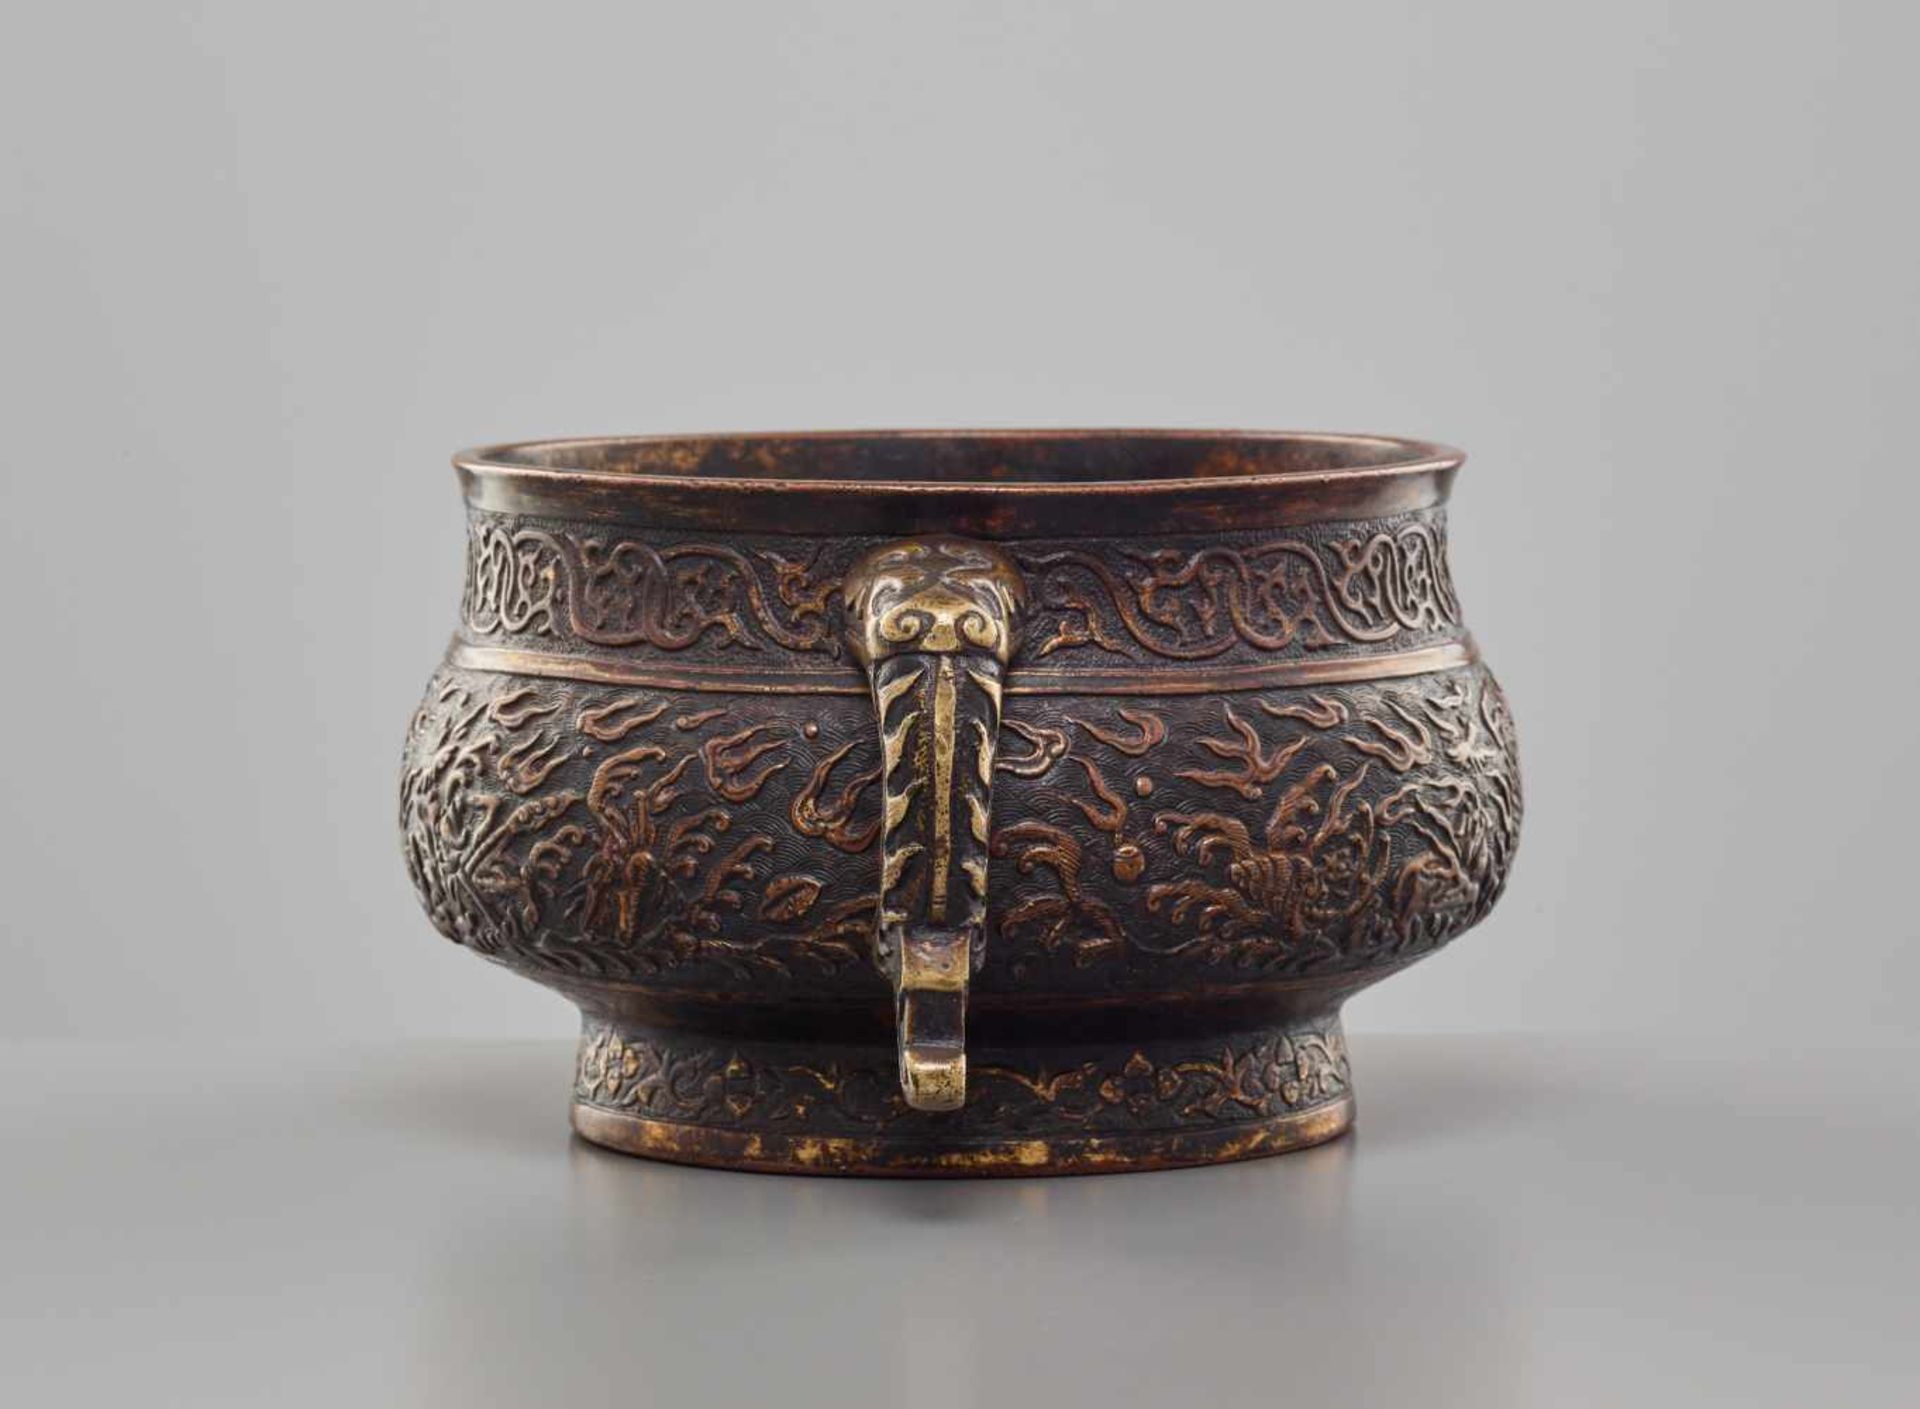 A LARGE PARCEL-GILT BRONZE CENSER, GUI, WANLI PERIOD, HU WENMING MARK THIS LOT IS PUBLISHED in - Image 4 of 13